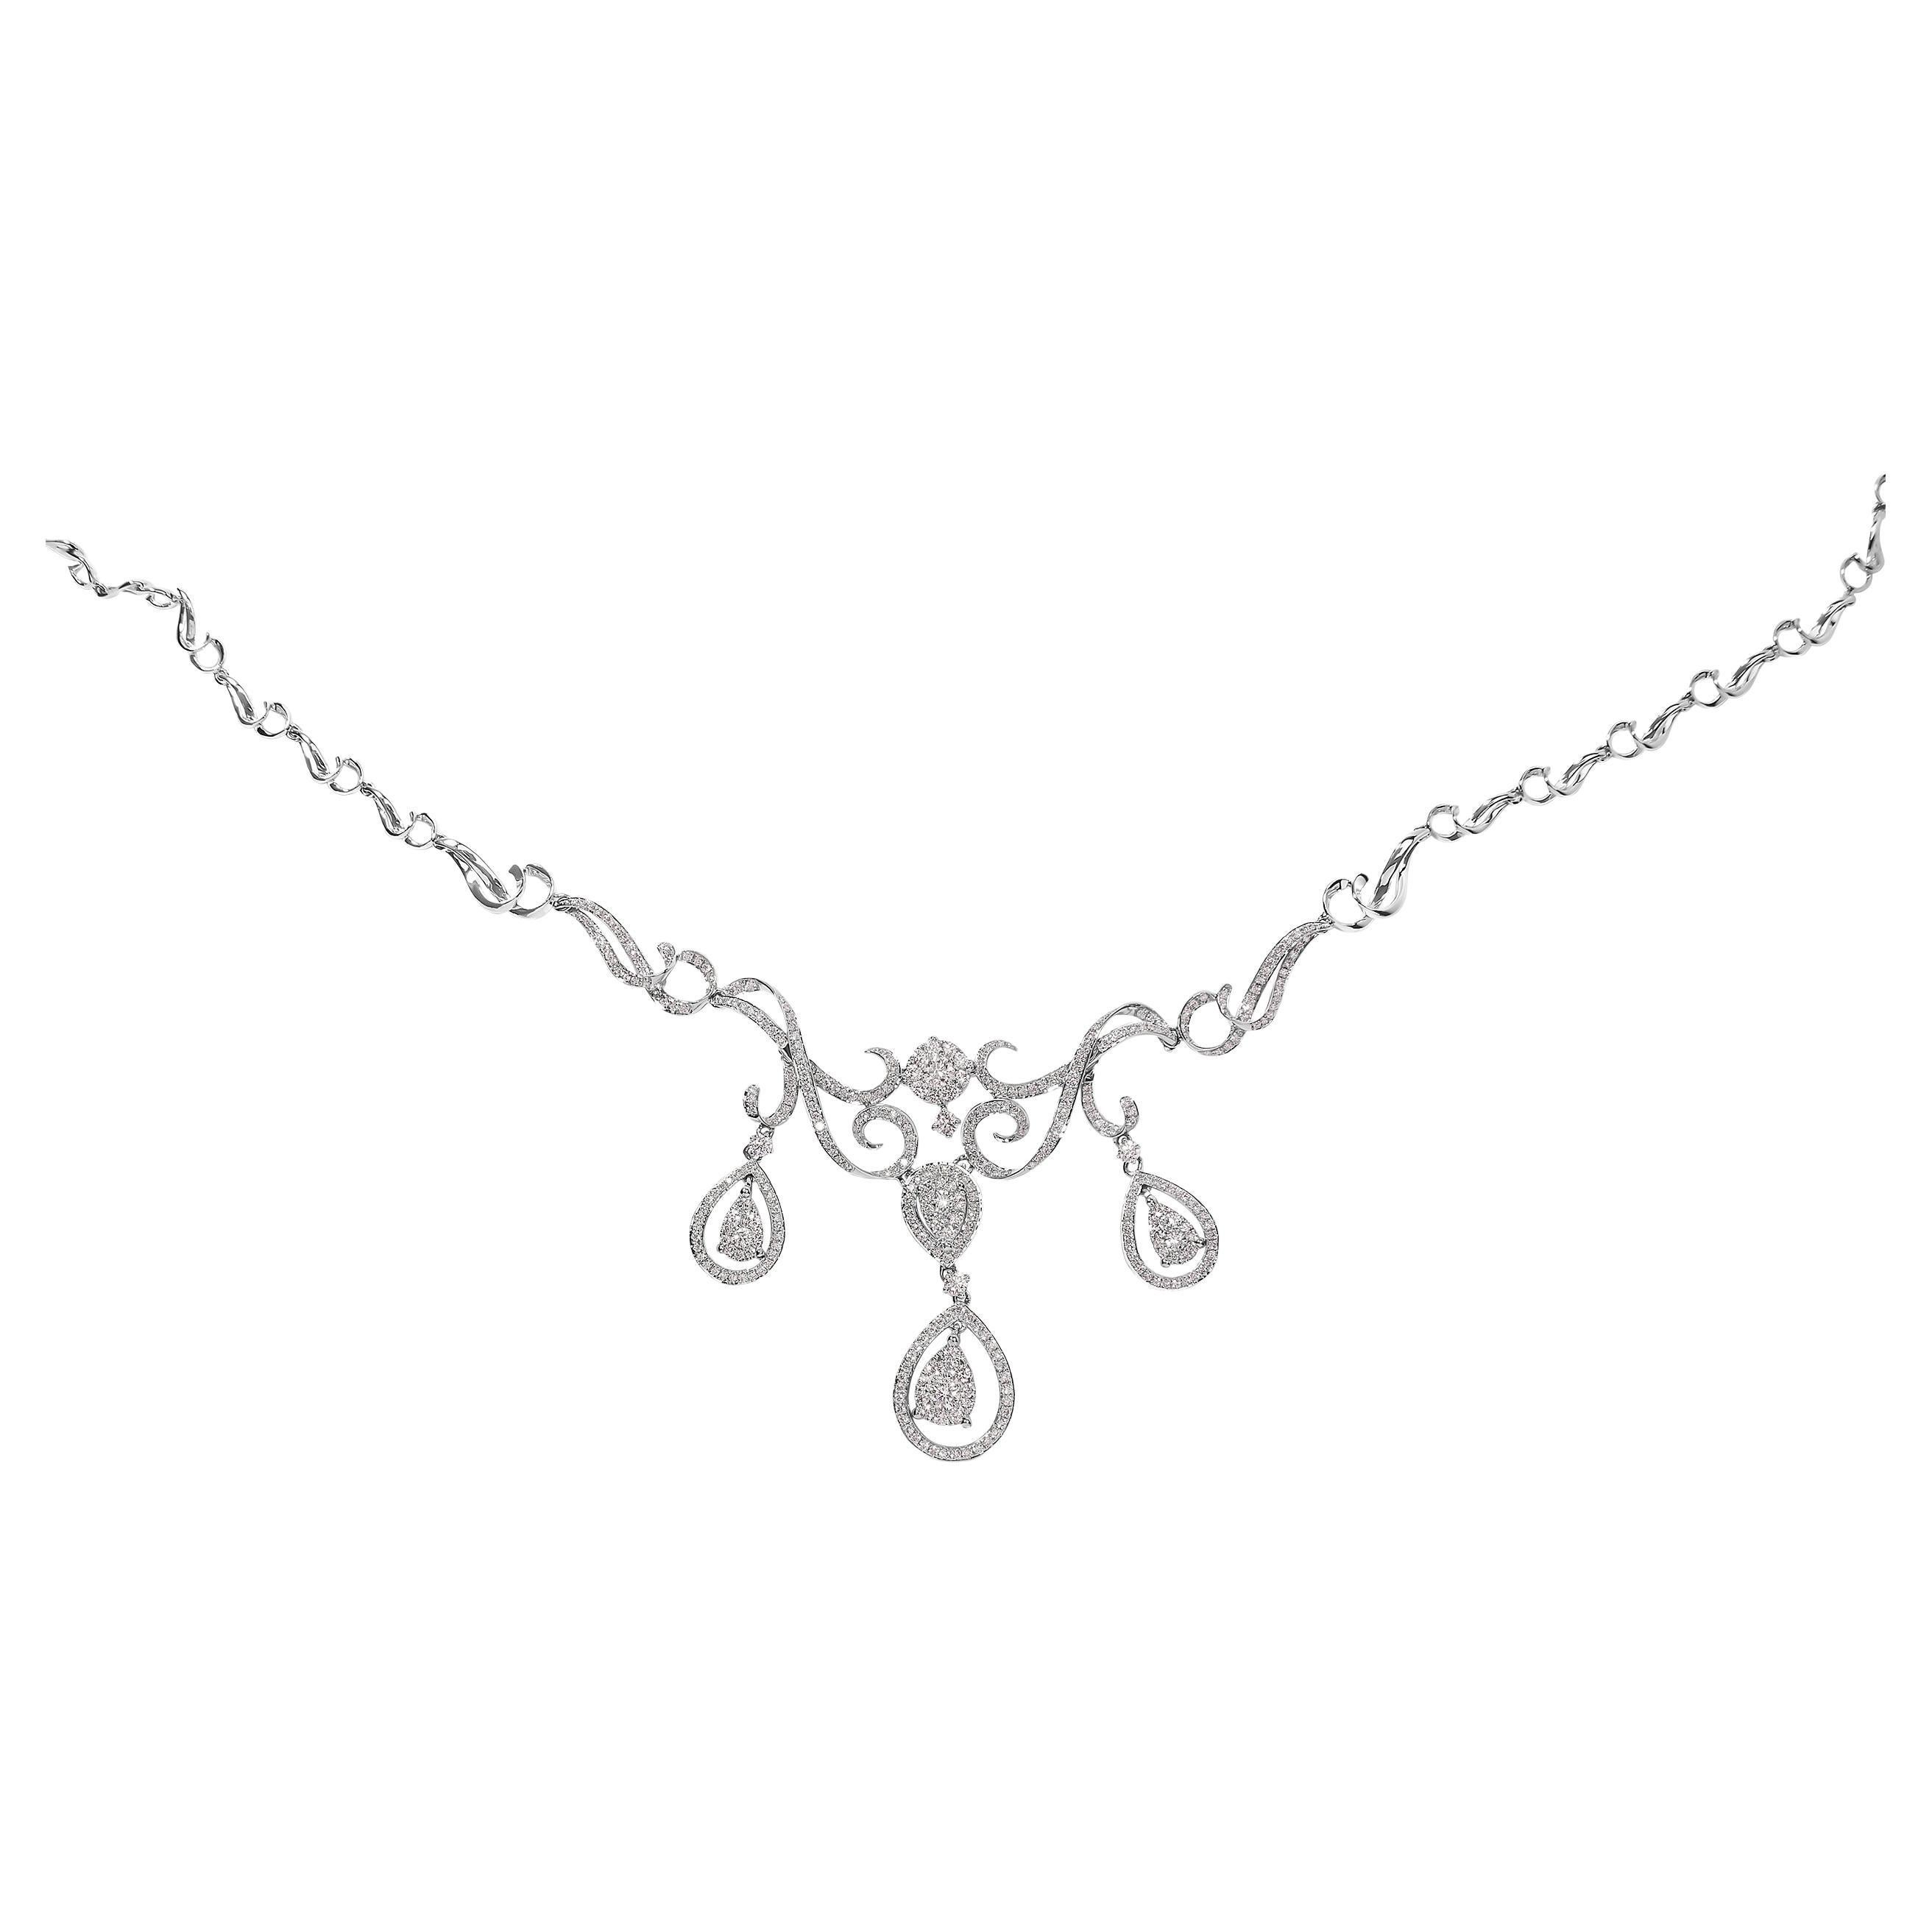 14K White Gold 3 1/2 Carat Diamond Statement Drop and Dangle Necklace For Sale